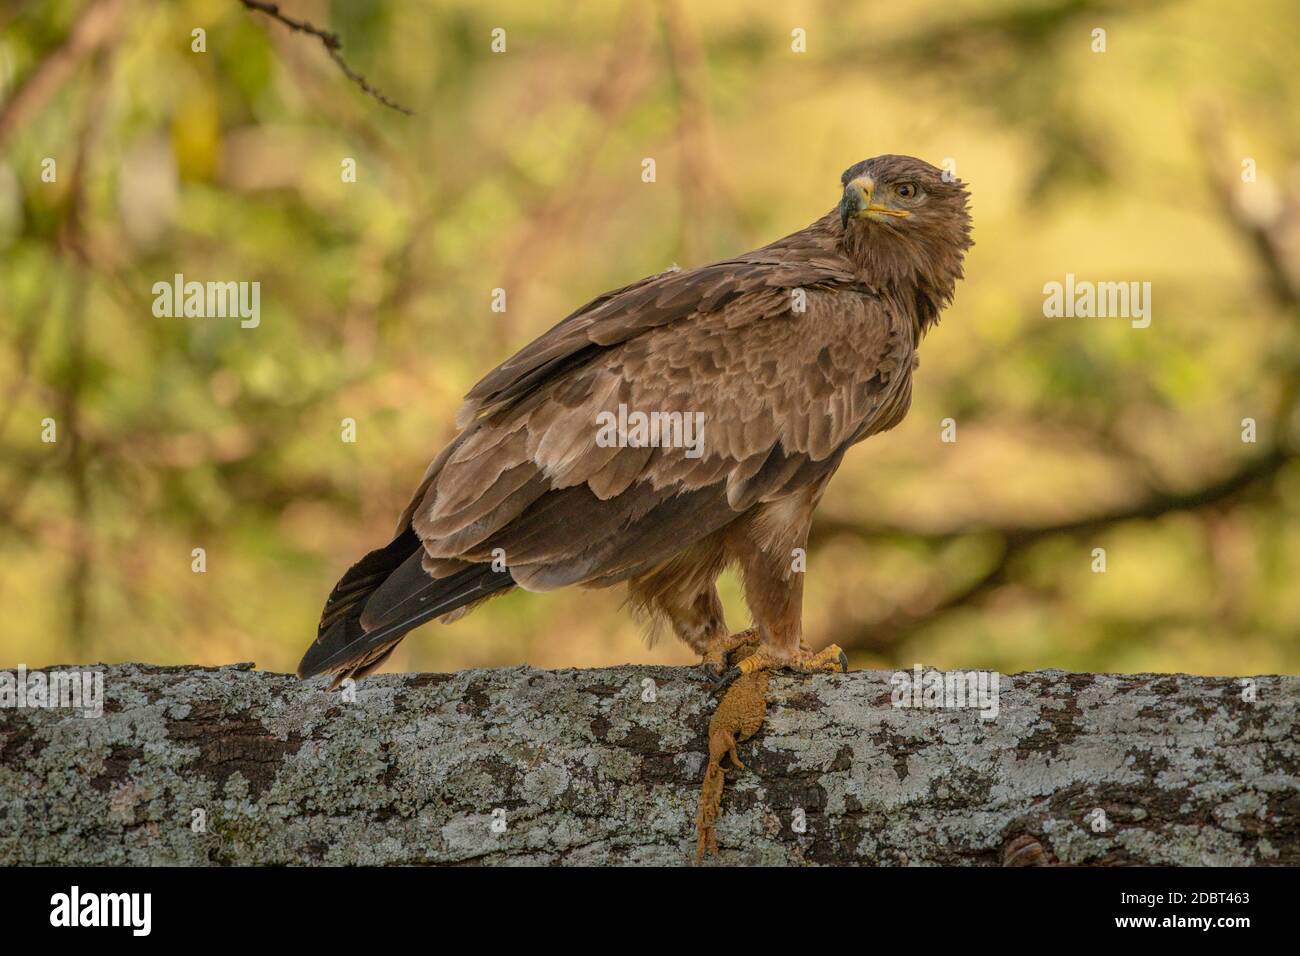 Tawny eagle on lichen-covered branch holding carrion Stock Photo